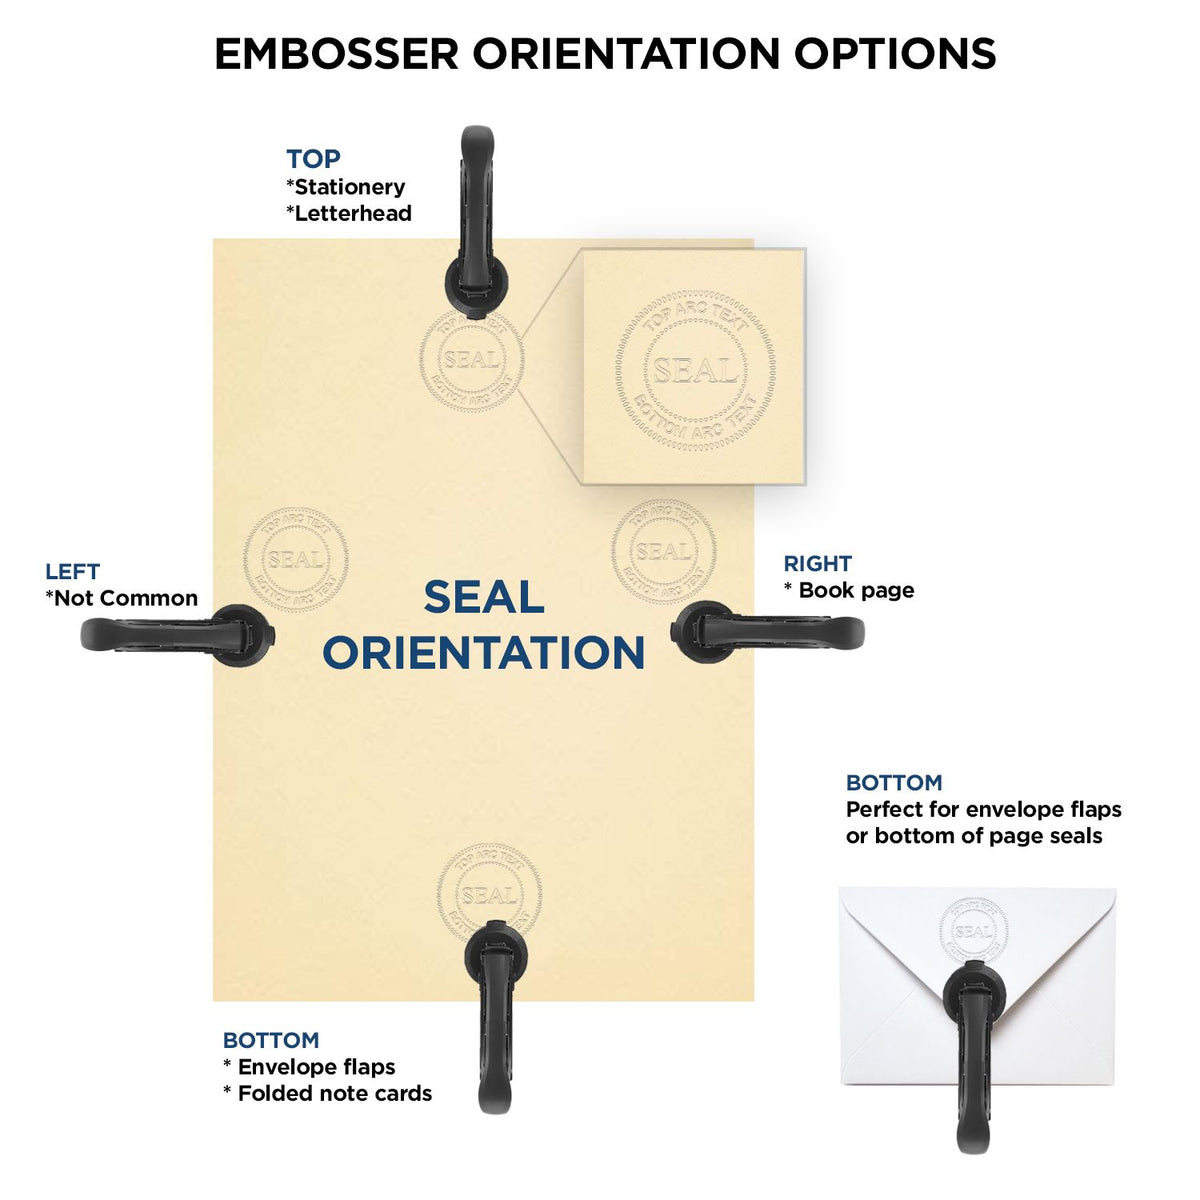 An infographic for the Heavy Duty Cast Iron Vermont Engineer Seal Embosser showing embosser orientation, this is showing examples of a top, bottom, right and left insert.